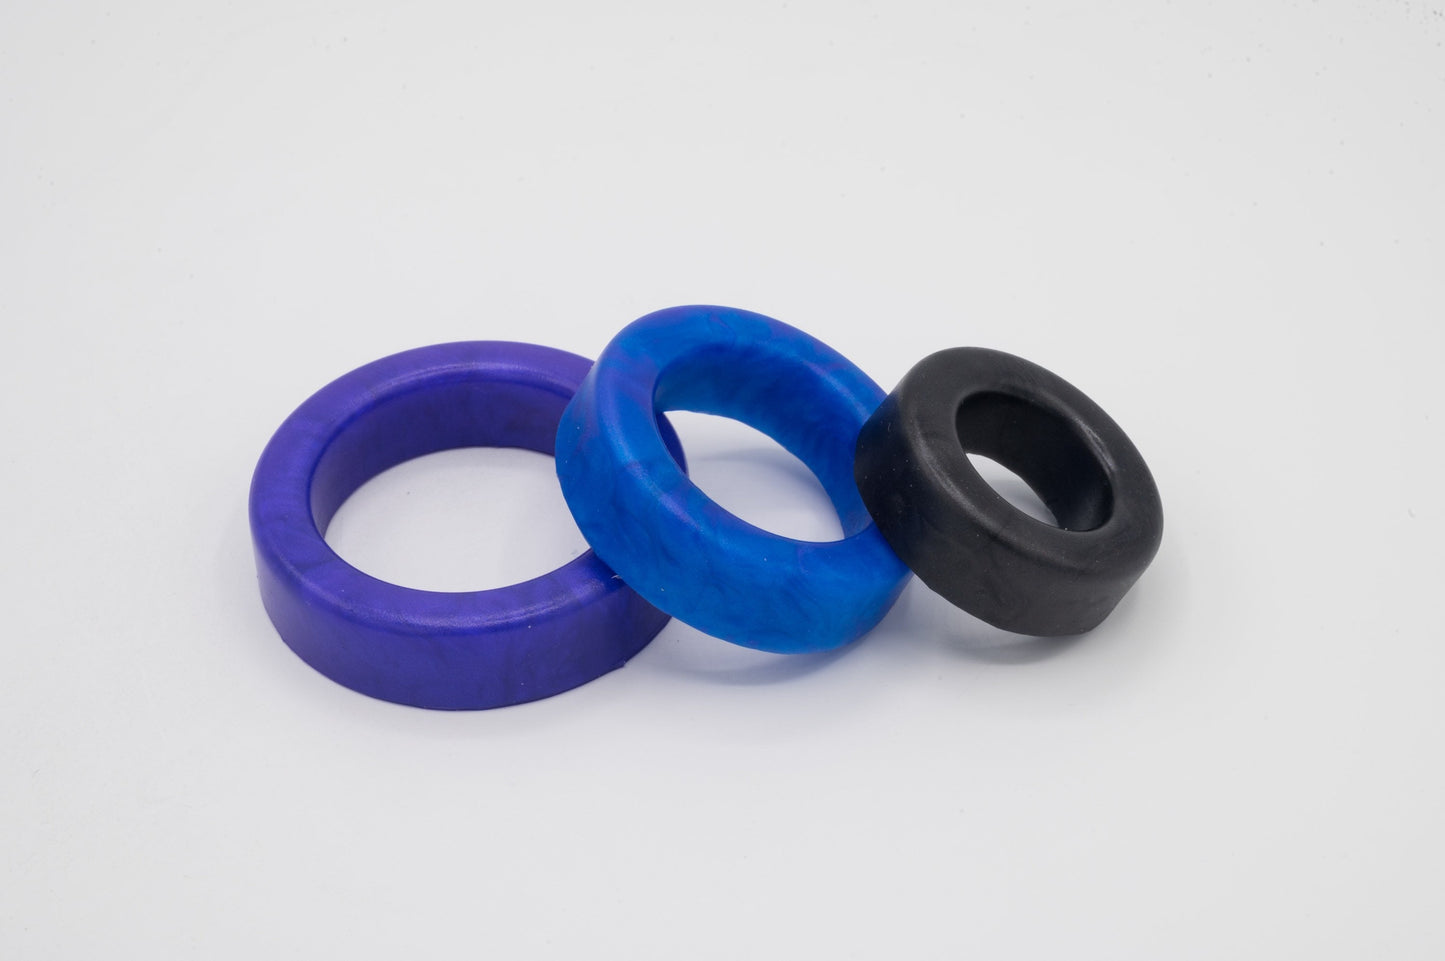 In Stock Cock Rings - Set of 3 - EXTRA FIRM - #426